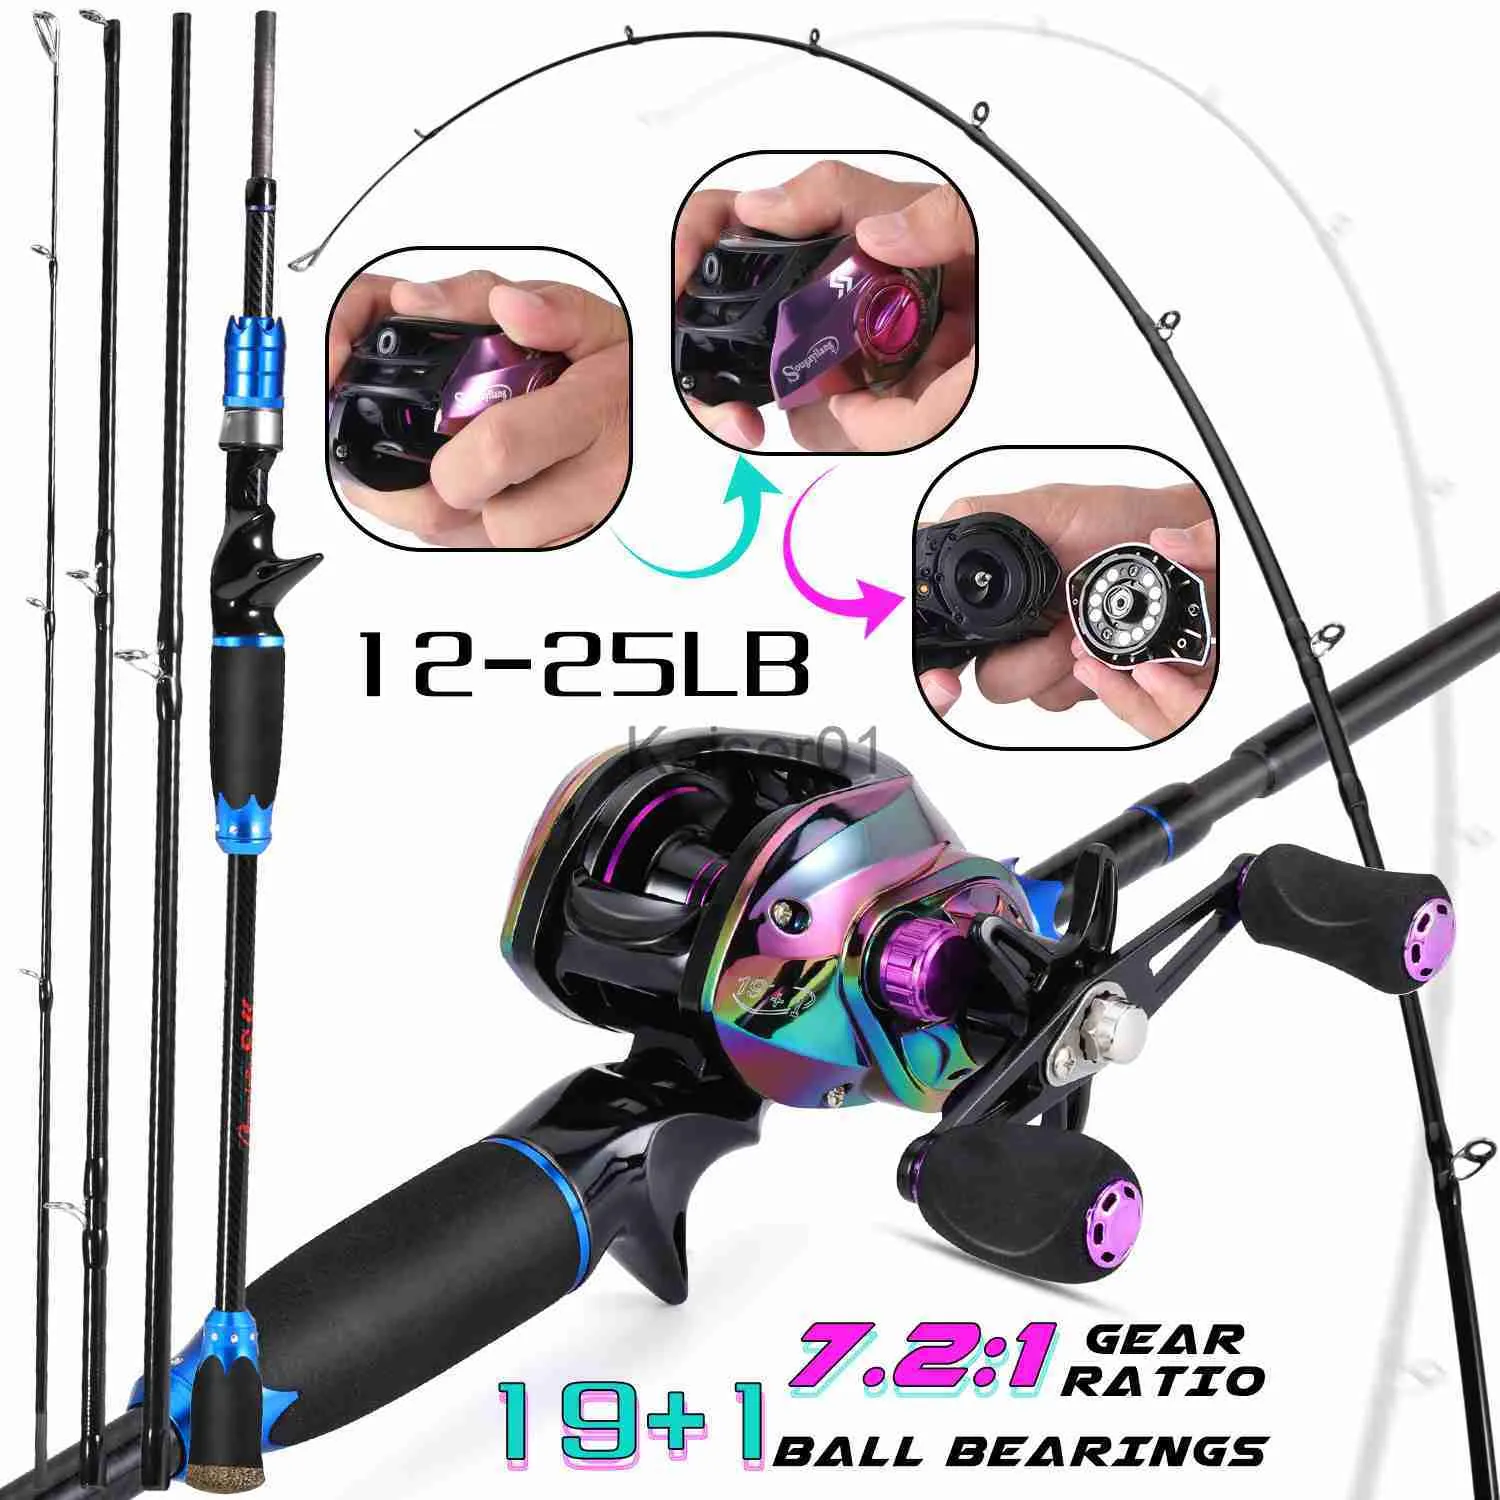 Rod Reel Combo Sougayilang Fishing Rod And Reel Combo 1.8 2.1m 4 Sections Baitcasting  Rod And 6.5 1 7.2 1 Gear Ratio Casting Reel Fishing Pesca X0901 From 31,93  €